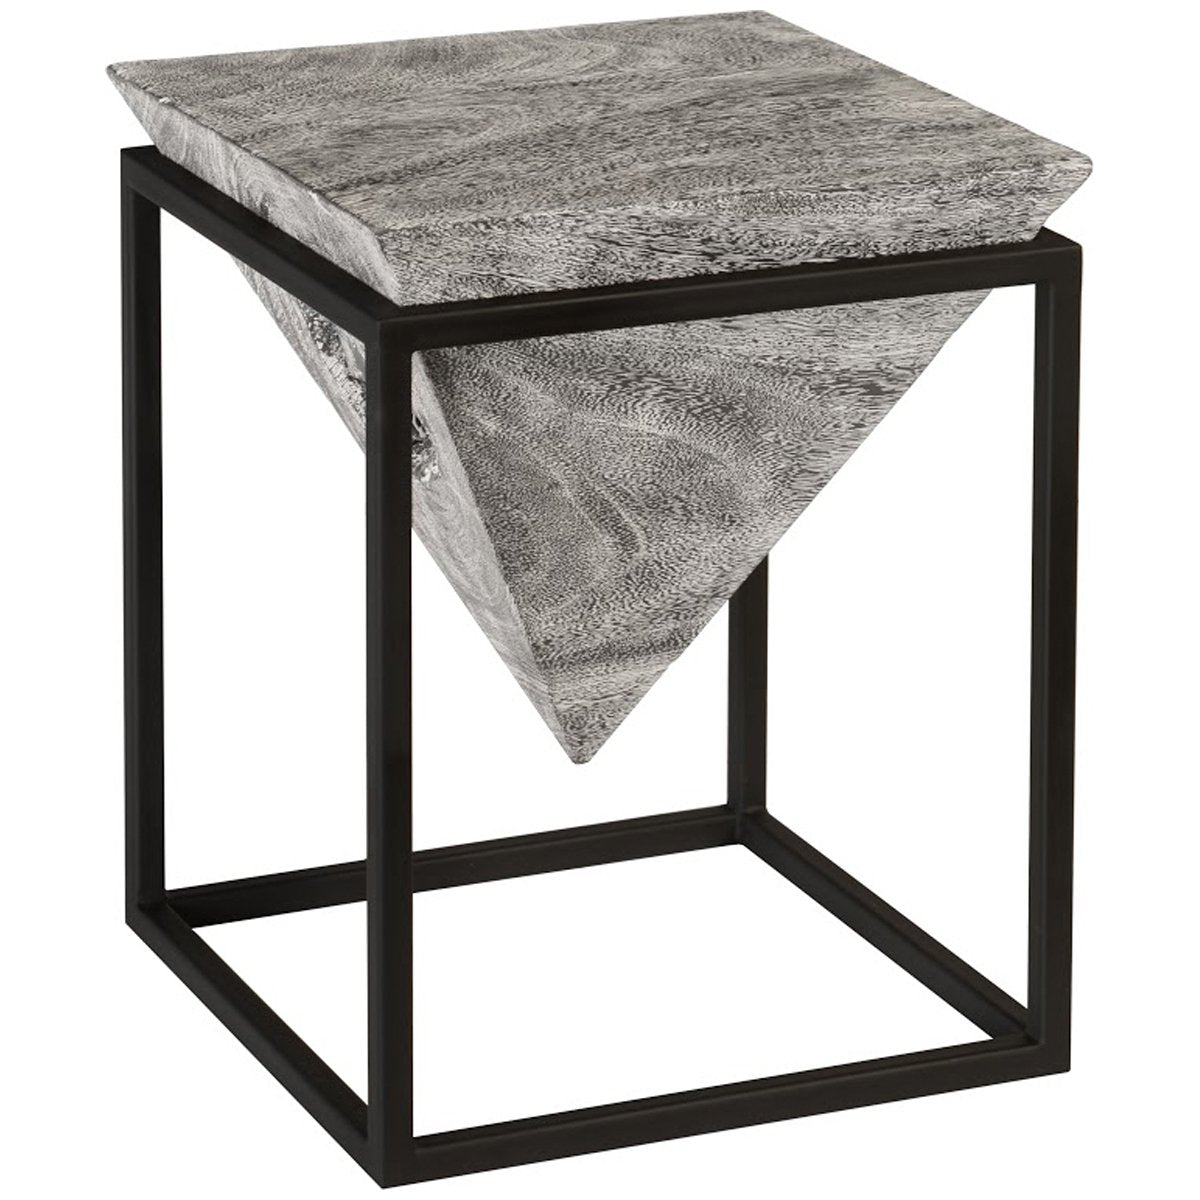 Phillips Collection Inverted Pyramid Side Table